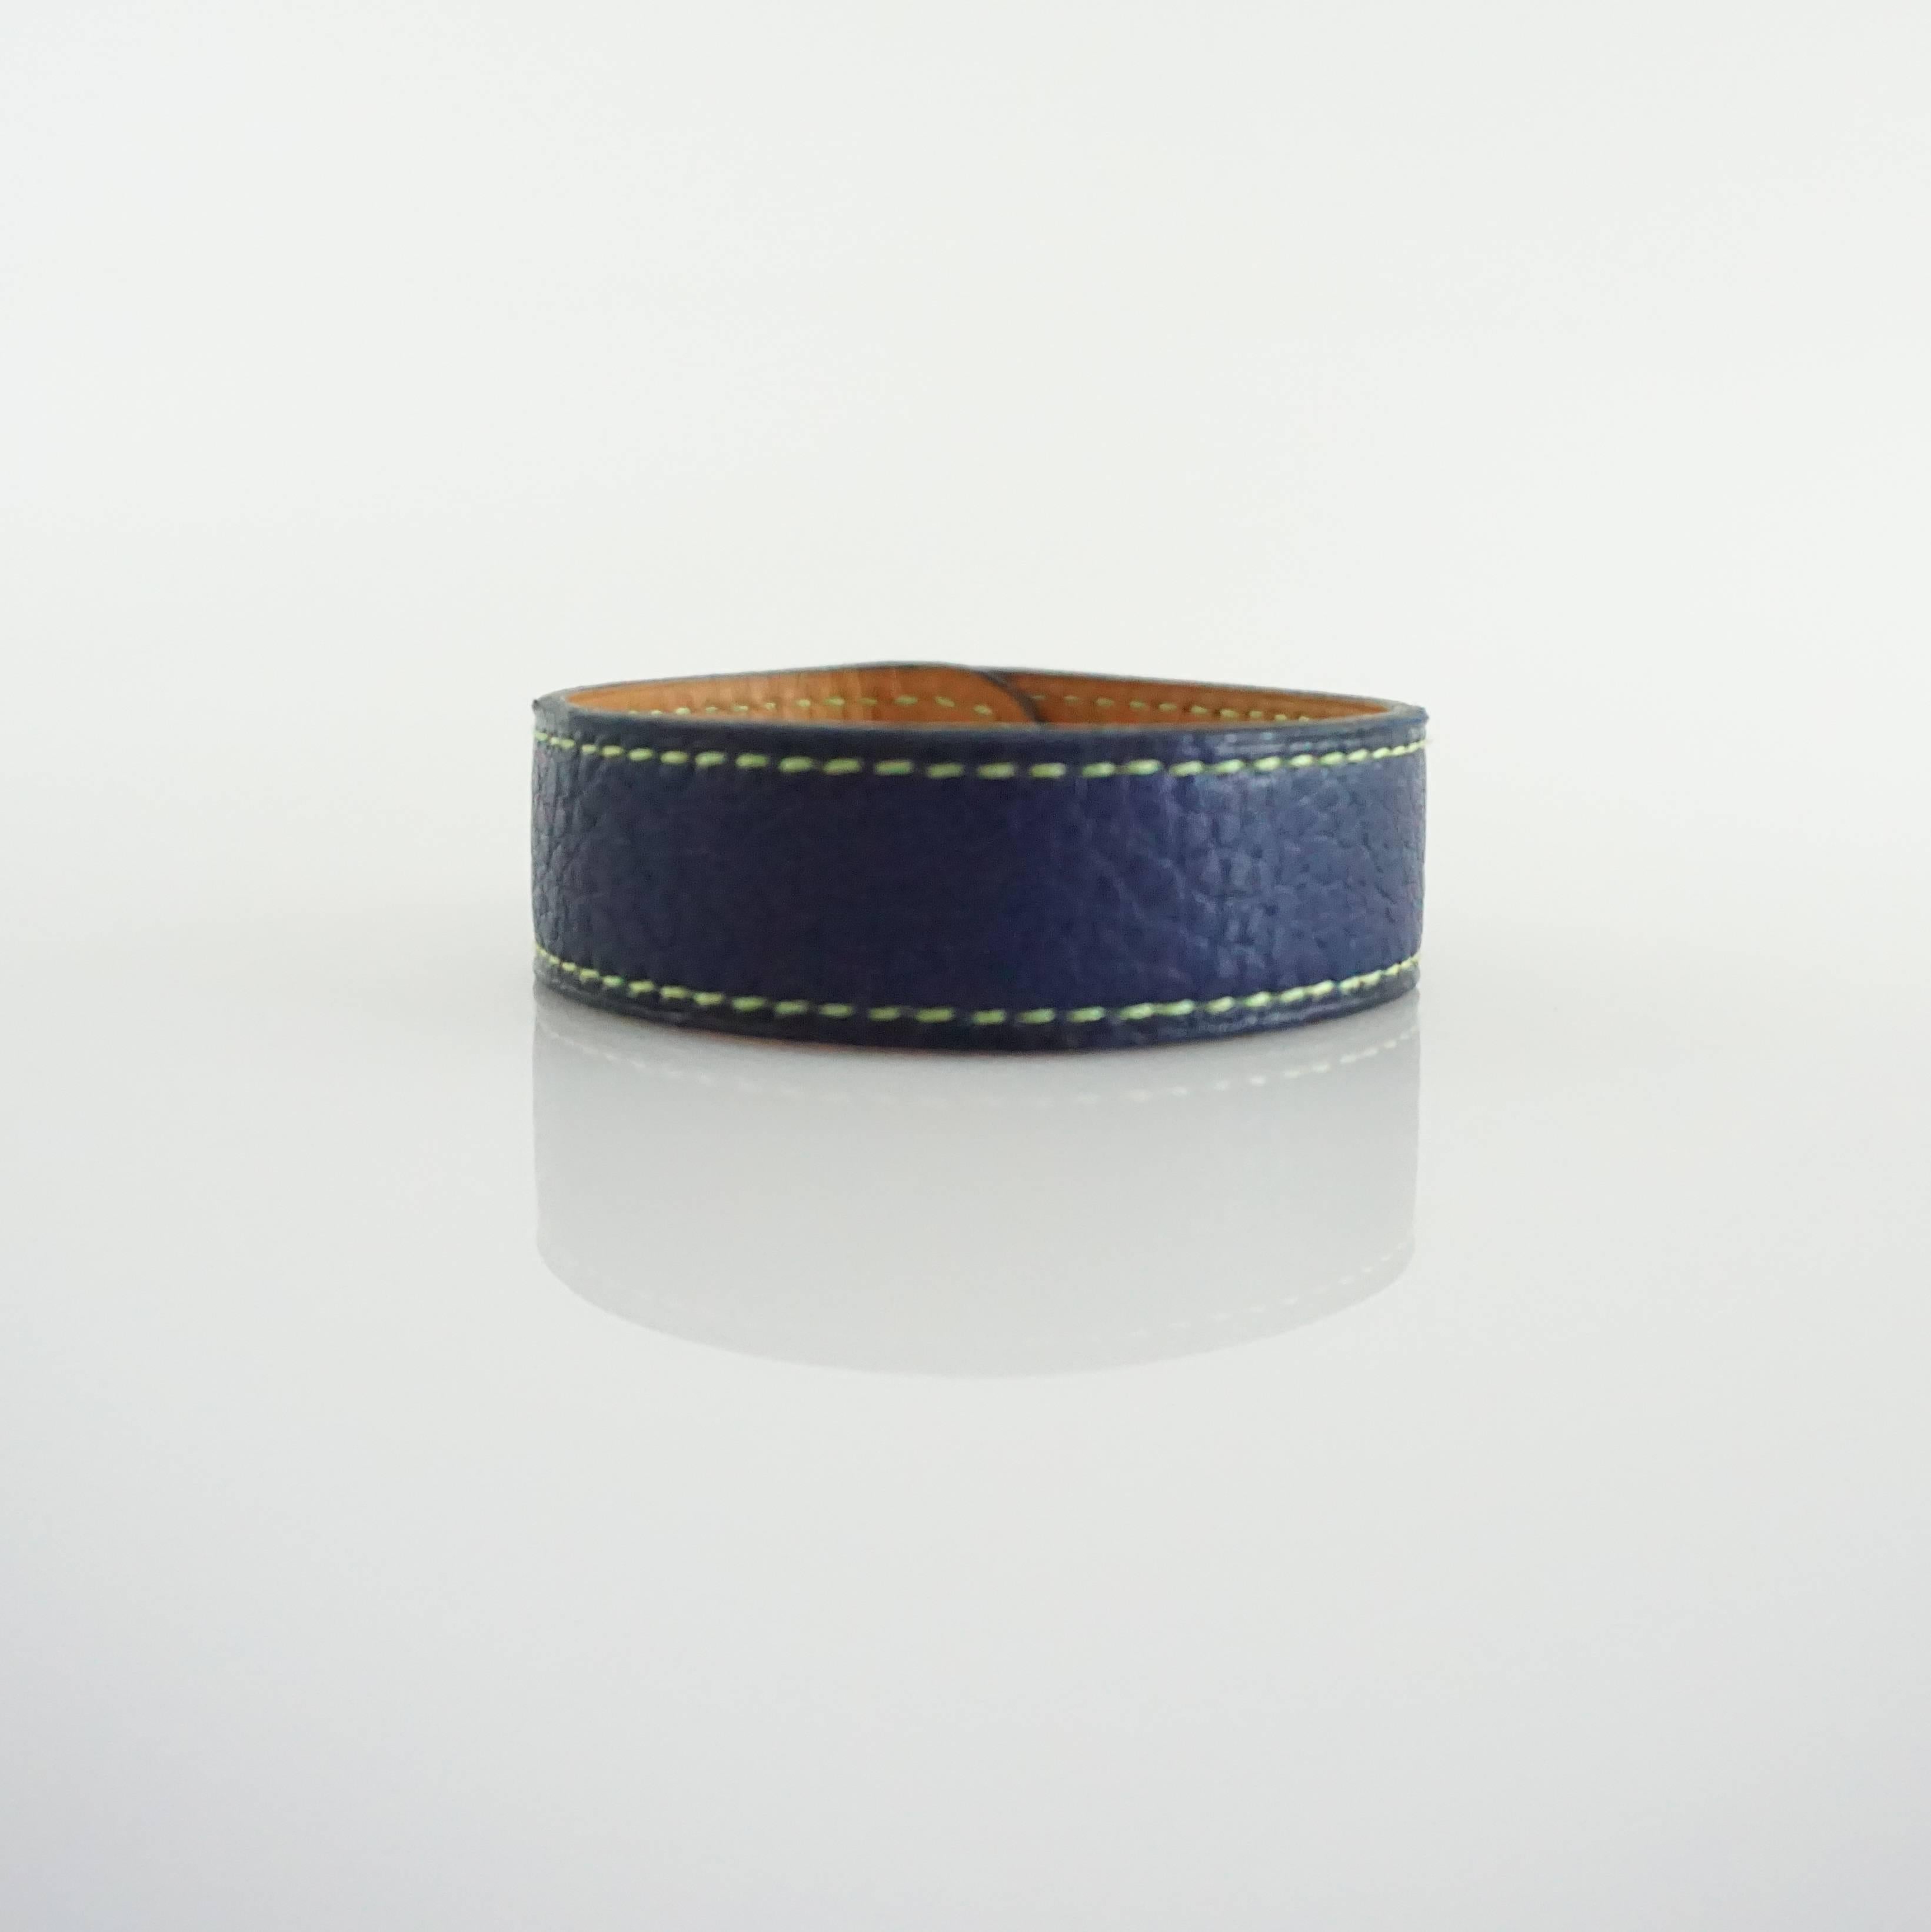 This Hermes blue leather bracelet is a beautiful simple piece. It has a silver Hermes Paris clasp and is in excellent condition with minimal wear. Purchase comes with a box and duster. 

Measurements
Circumference: 8.5